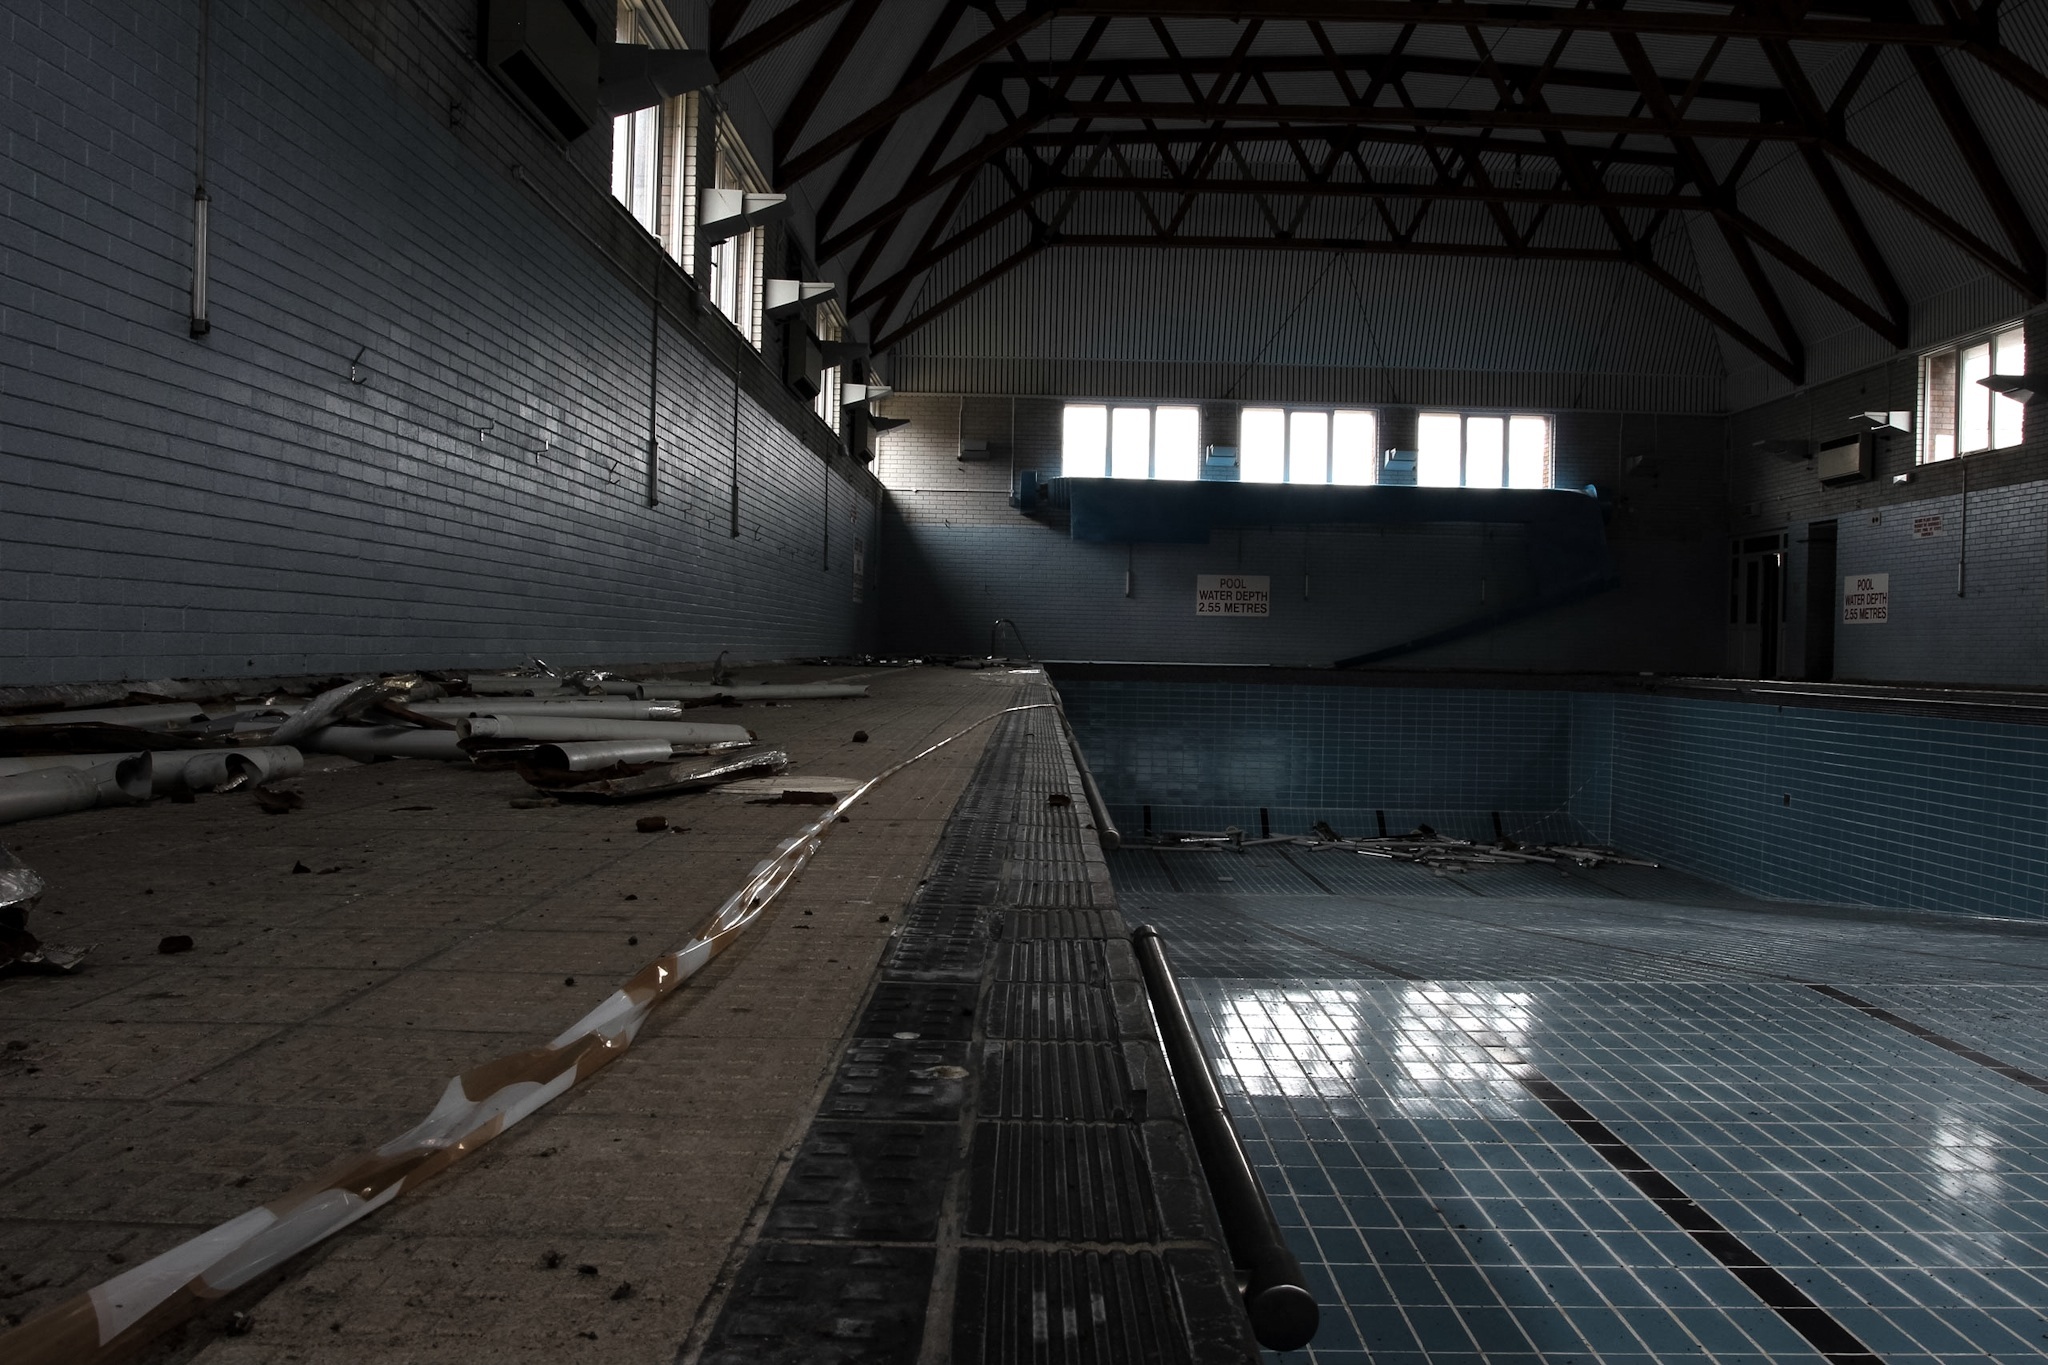 The swimming pool at the police training college in Cwmbran